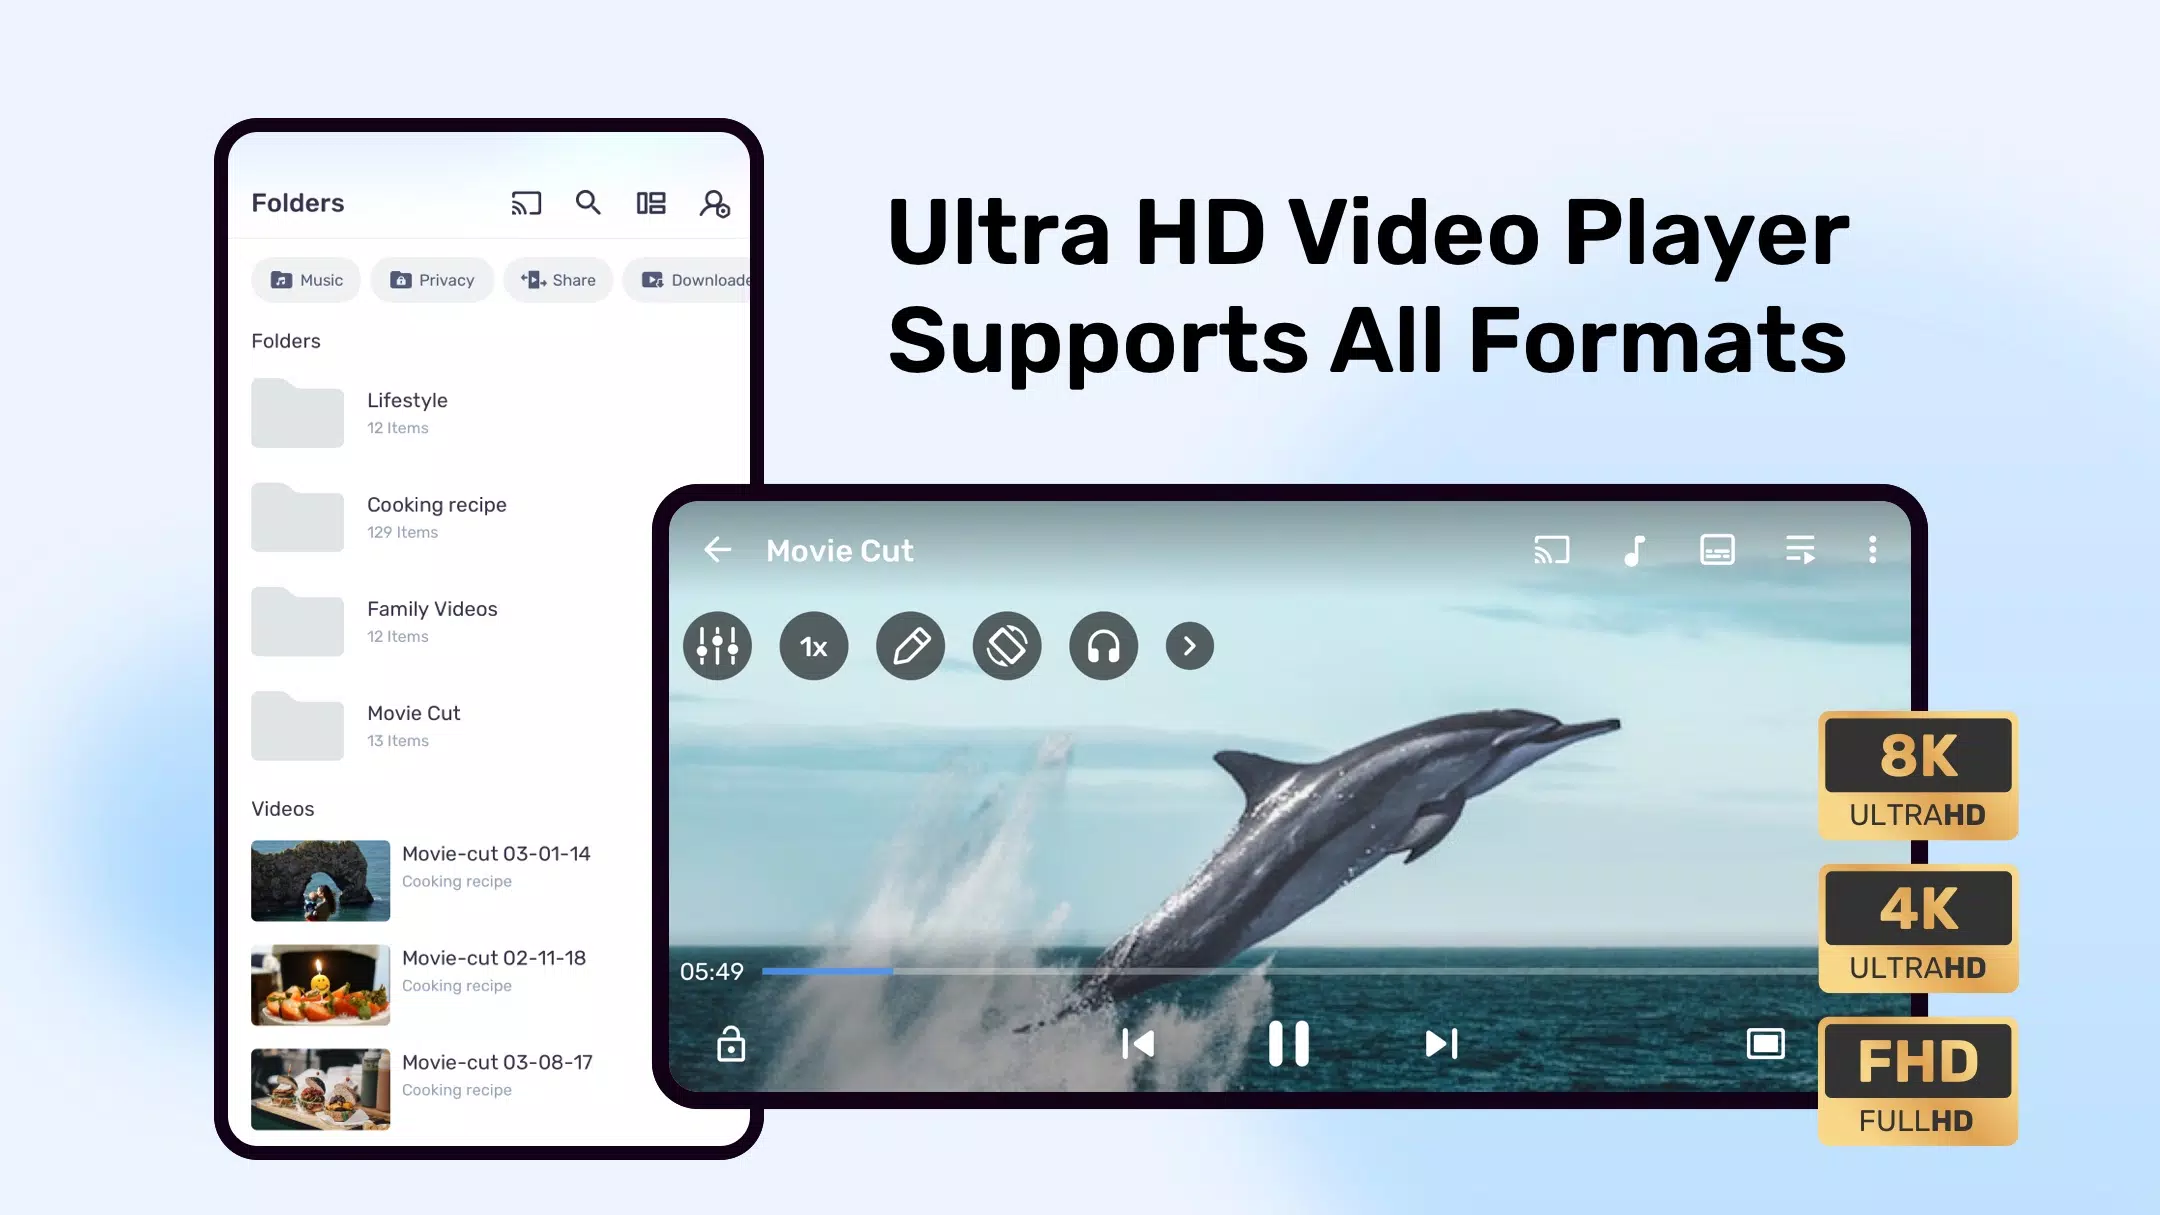 MX Player Beta now allows users to download videos from third